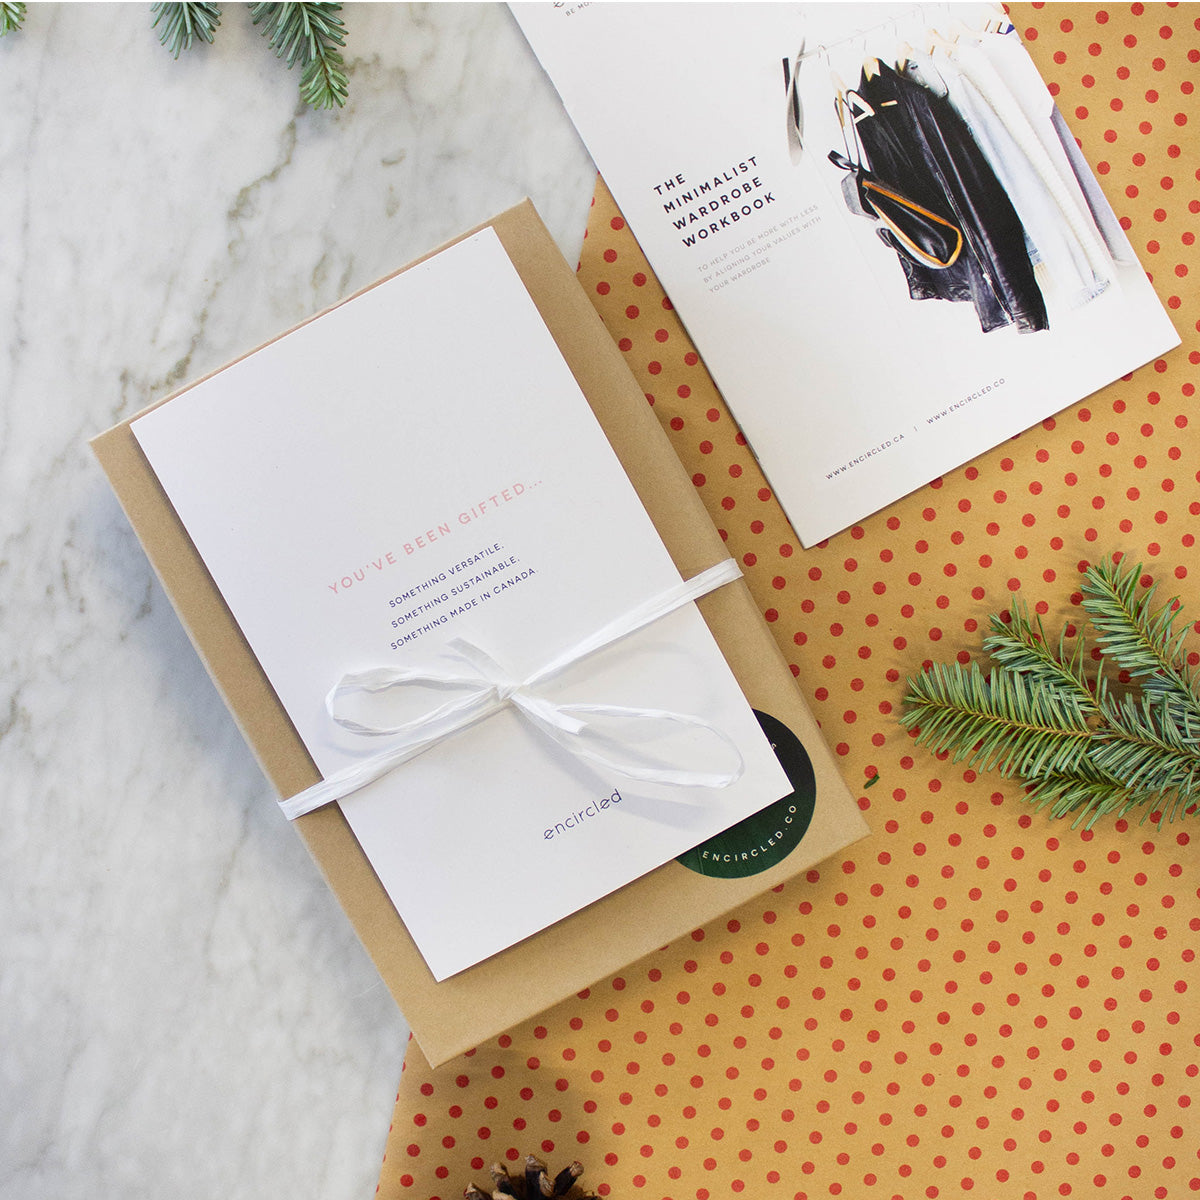 10 Best Eco-friendly and Sustainable Christmas Gift Ideas you'll Love